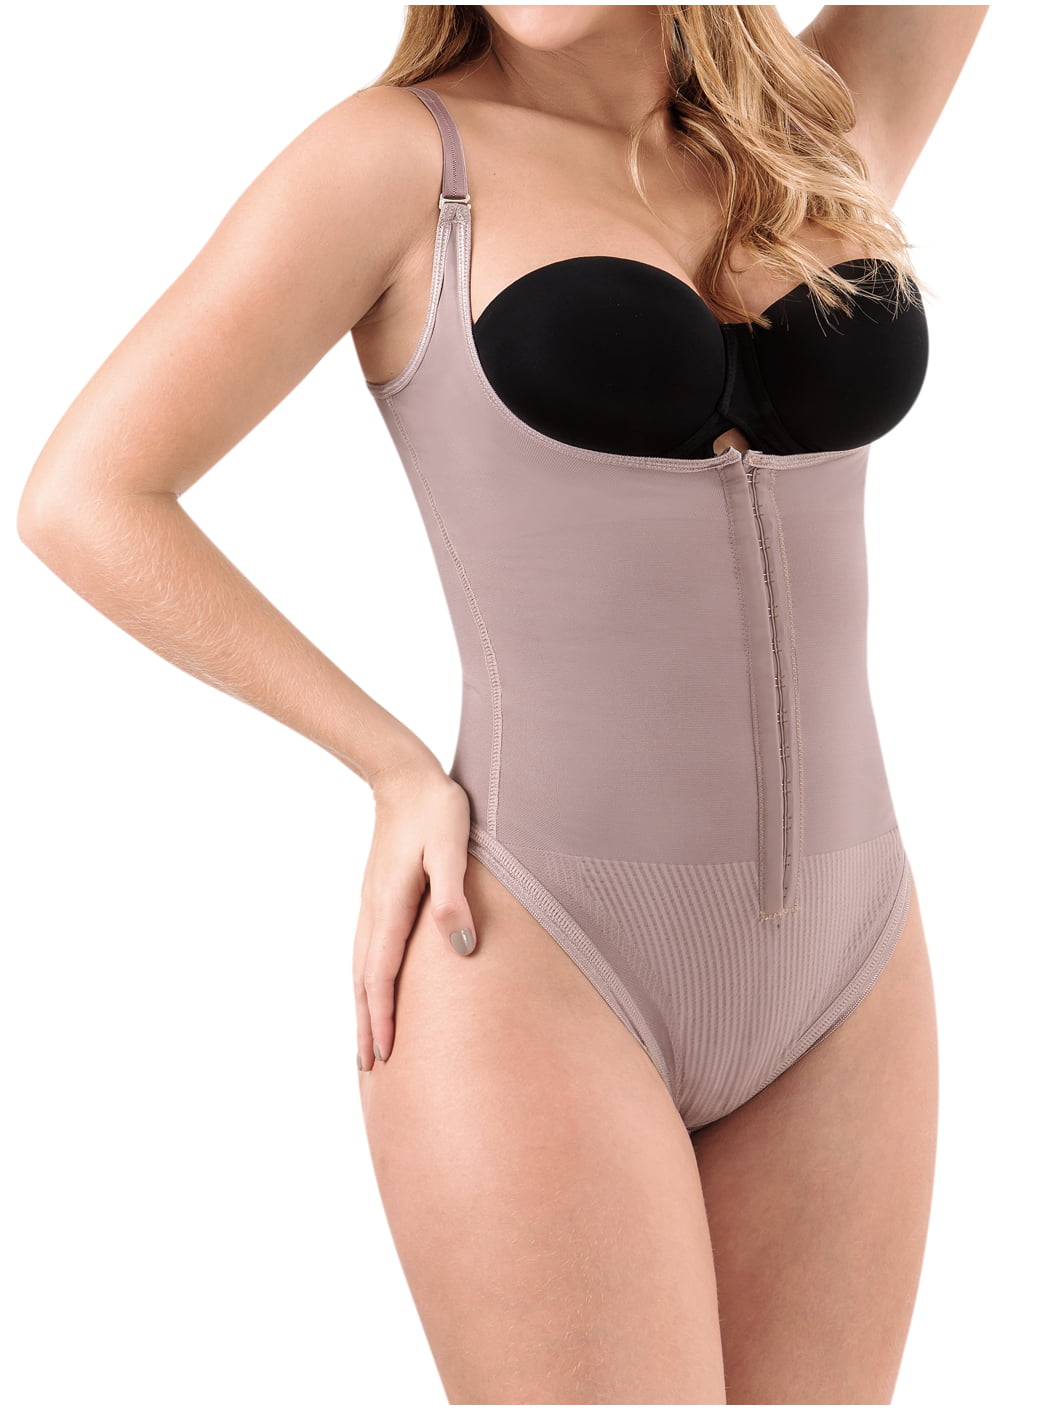 LT.ROSE 21827 Fajas Colombianas Reductoras Slimming Tummy Control Thong  Bodysuit for Women Cocoa 3XL 